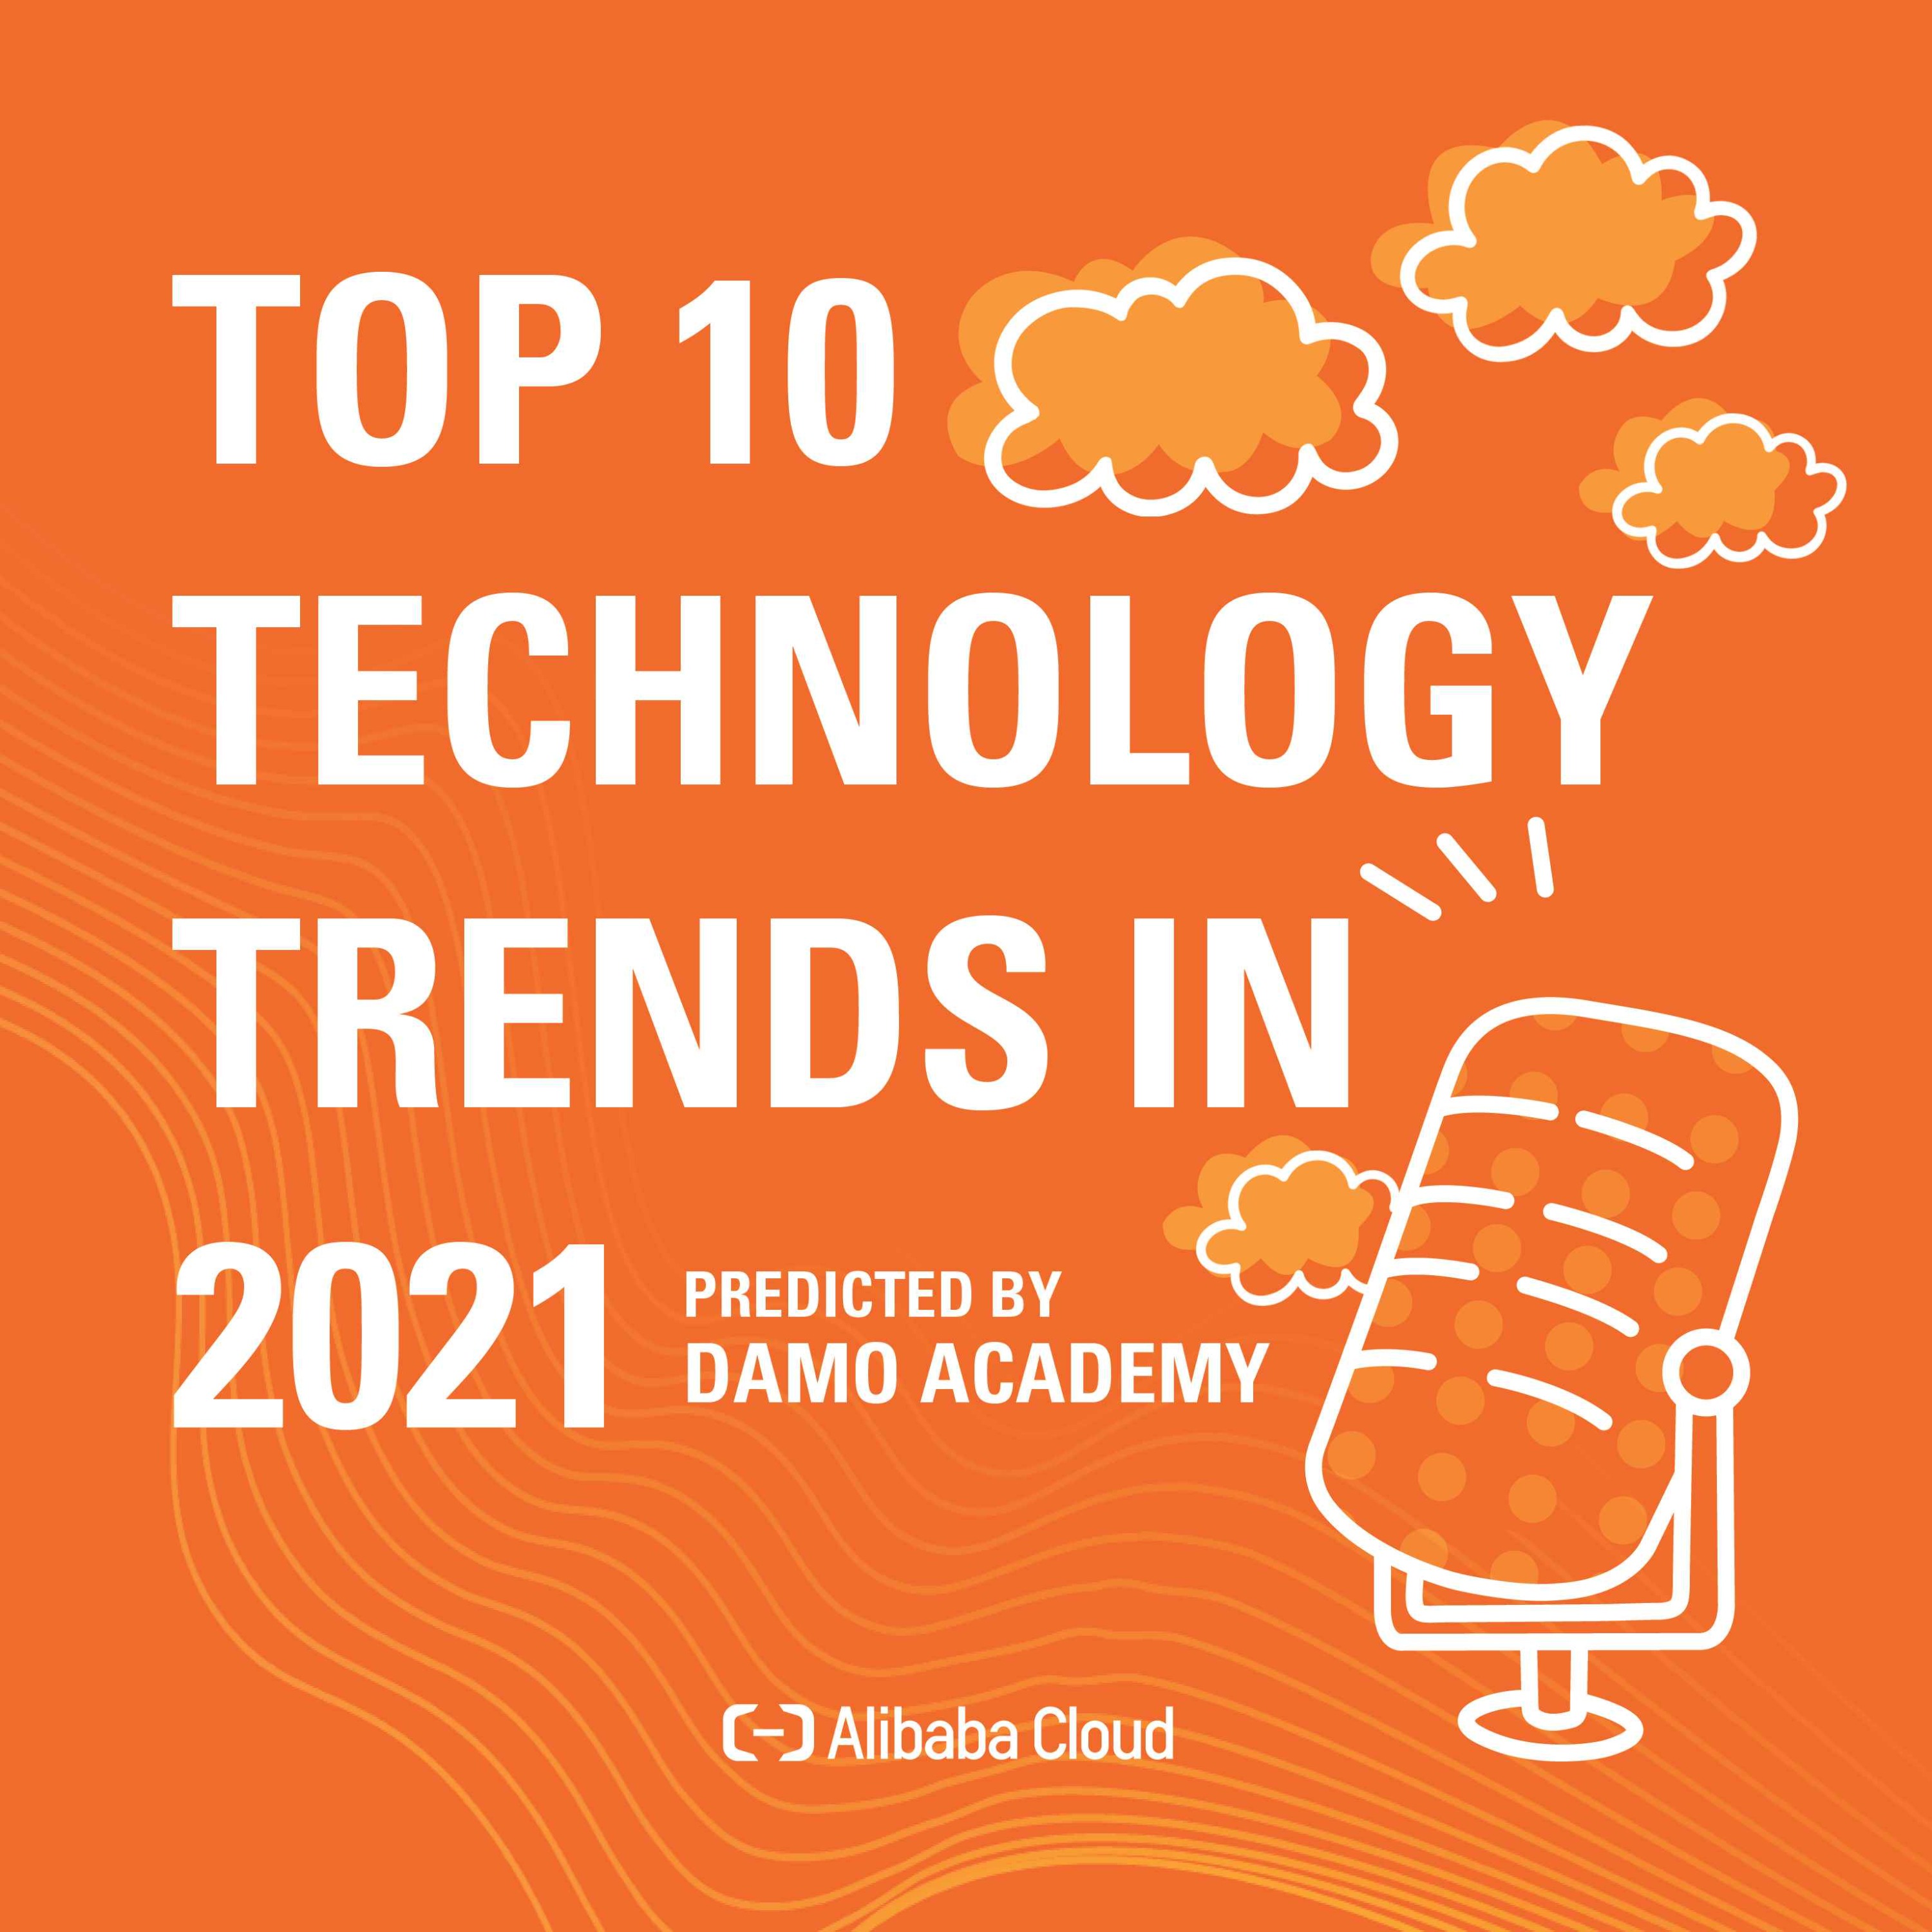 Alibaba Cloud Presents: The Top Ten Technology Trends In 2021 - Predicted by Damo